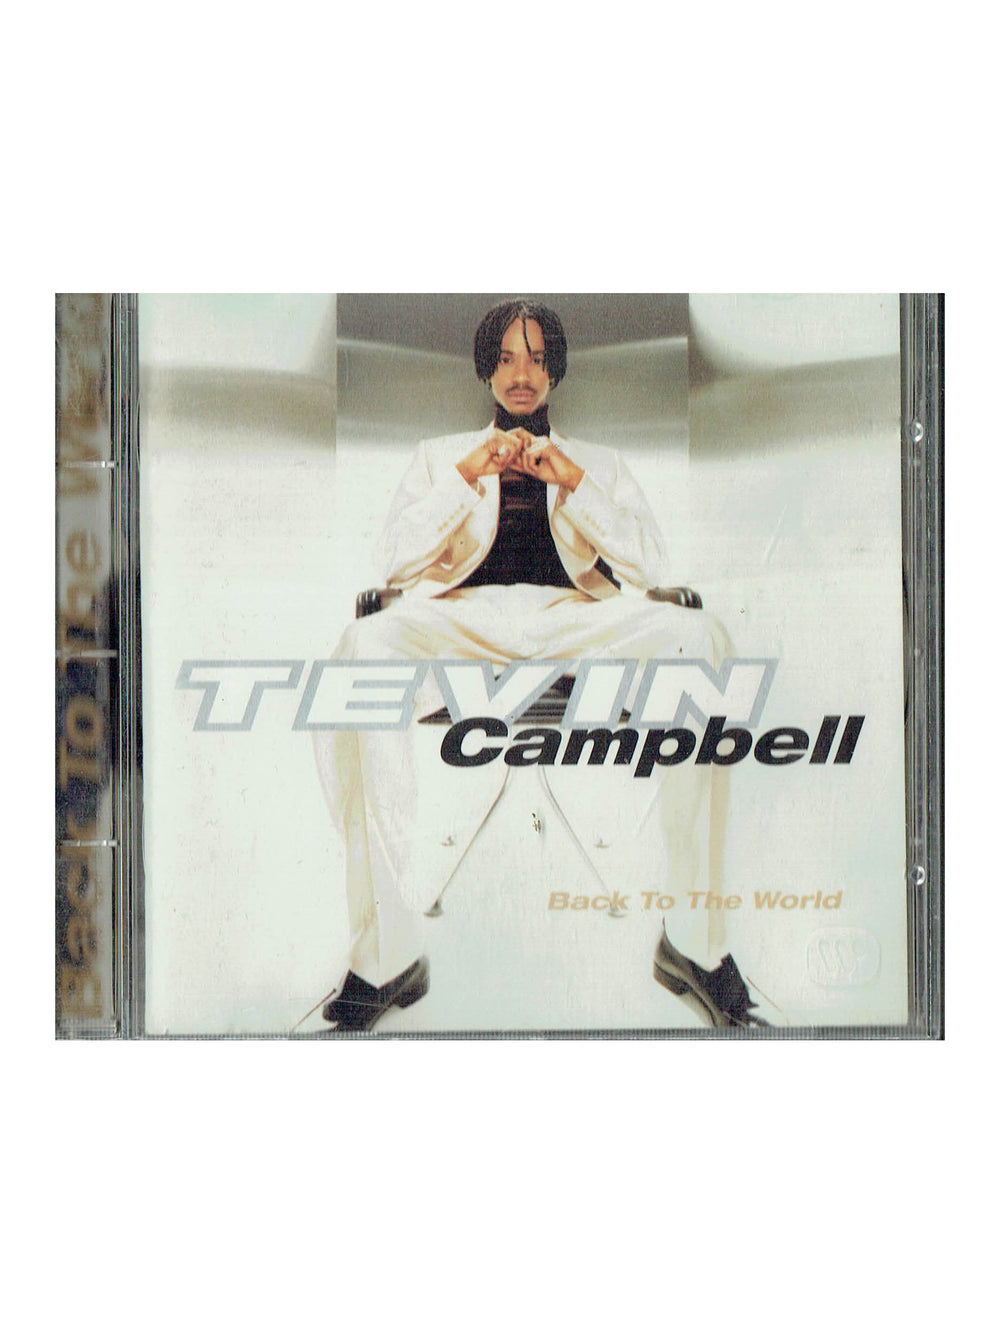 Prince – Tevin Campbell Back To The World CD Album EU Preloved: 1996